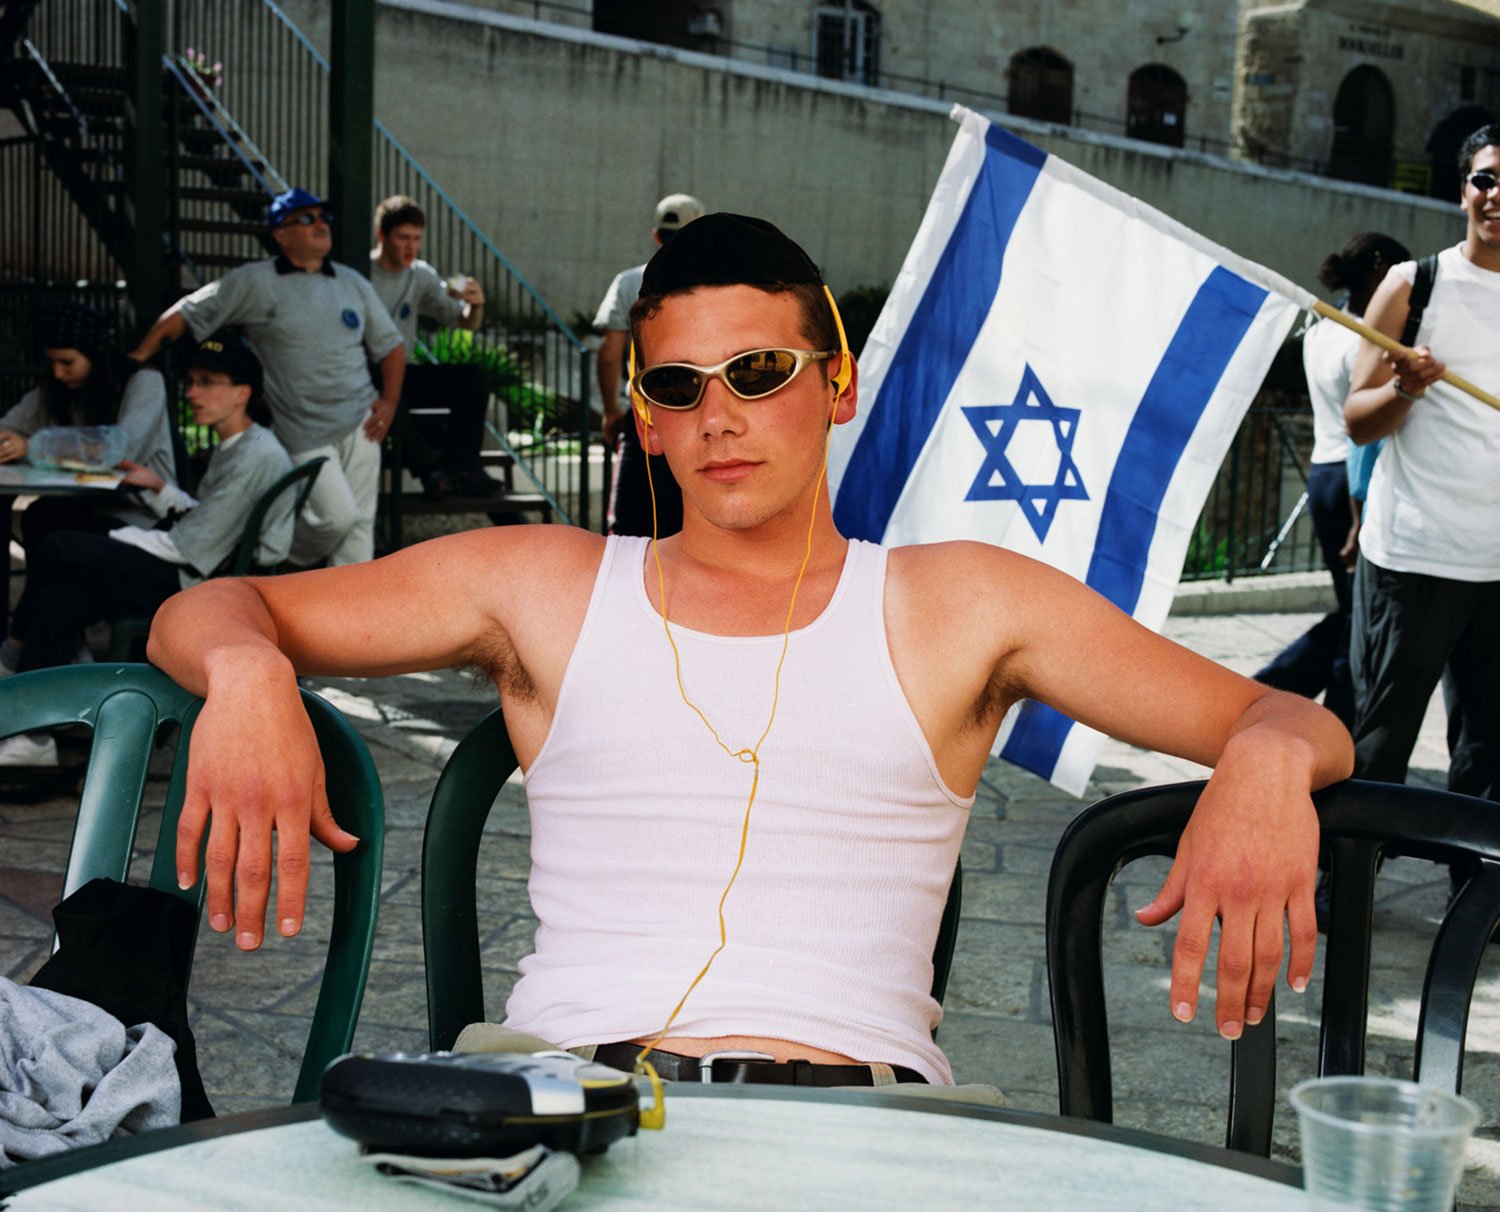 Yussie in the Old City, Jerusalem, May 2002